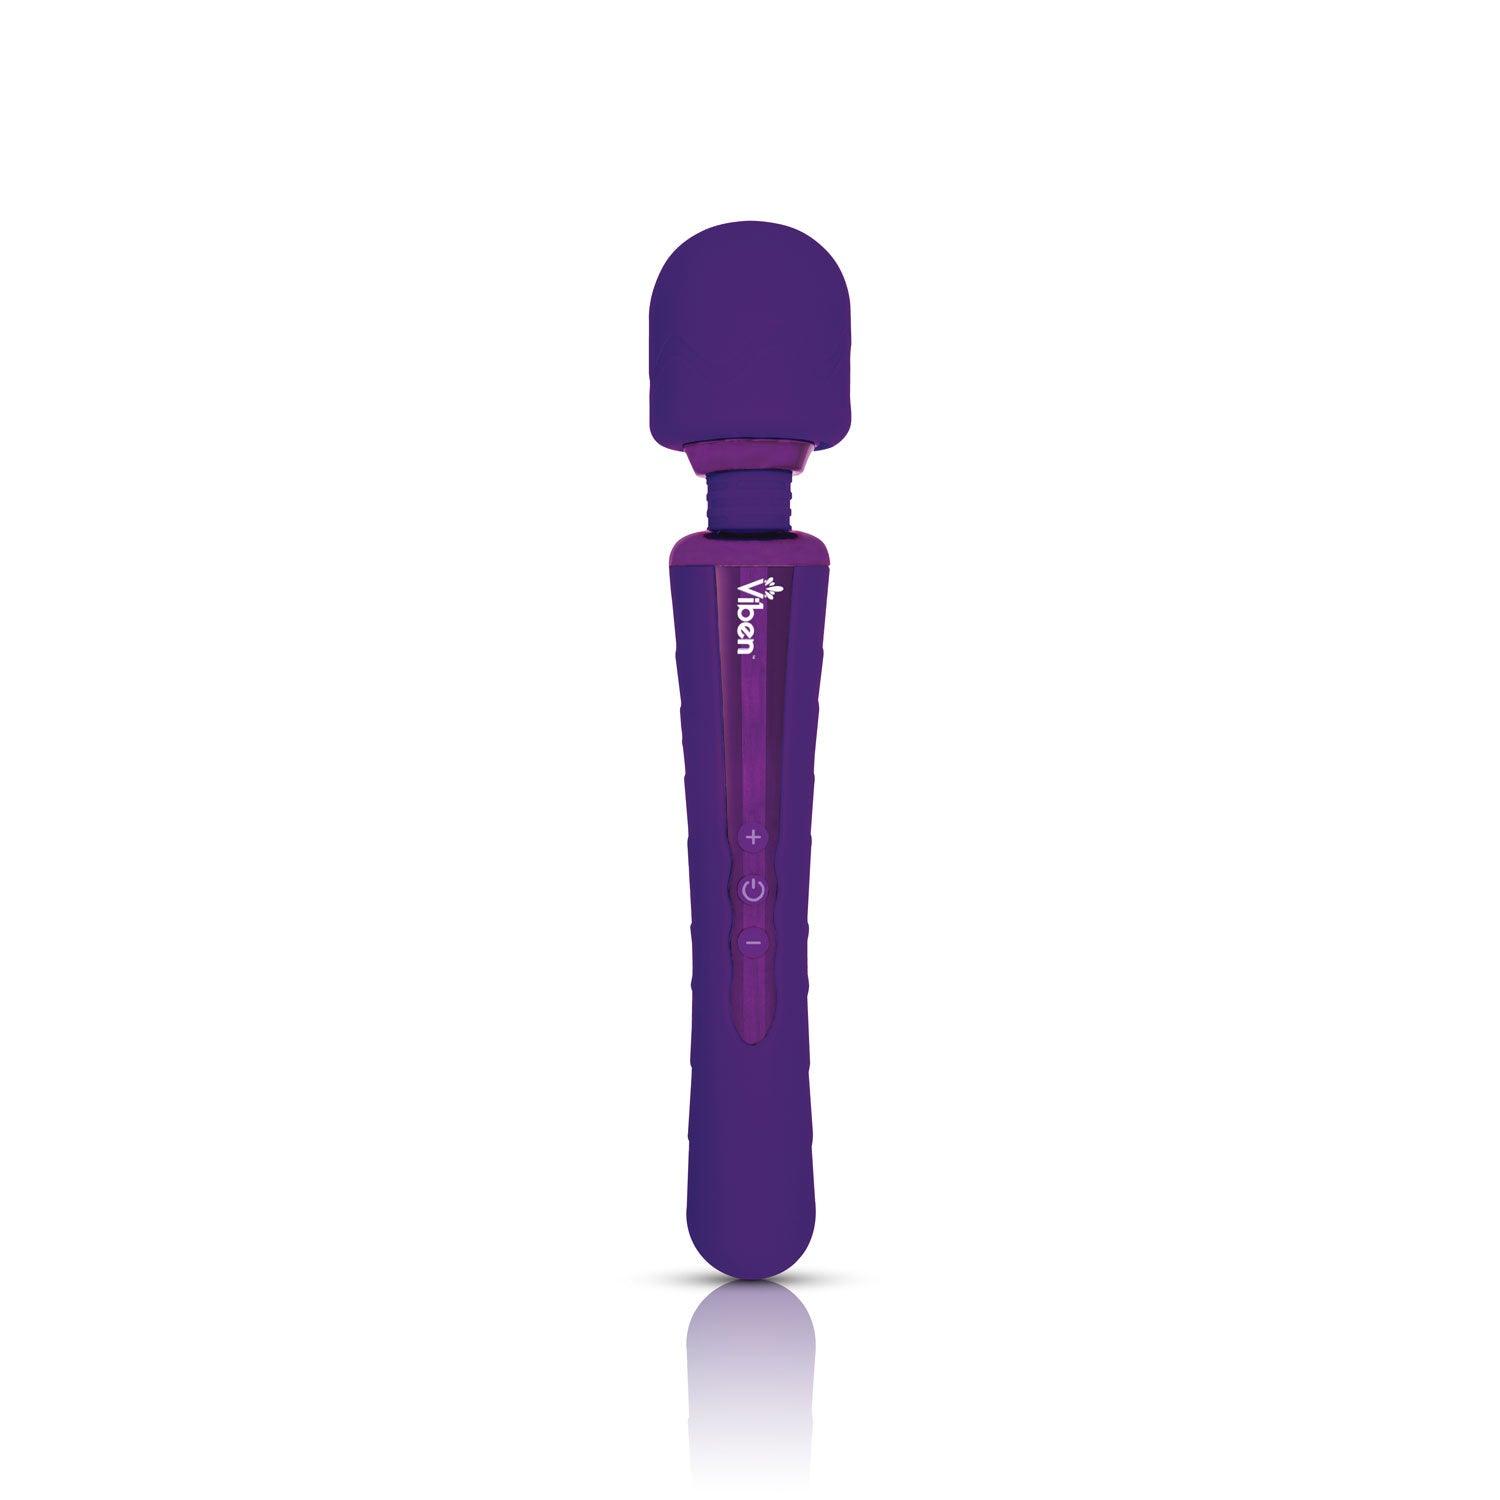 Obsession - Intense Wand Massager - Violet - My Sex Toy Hub